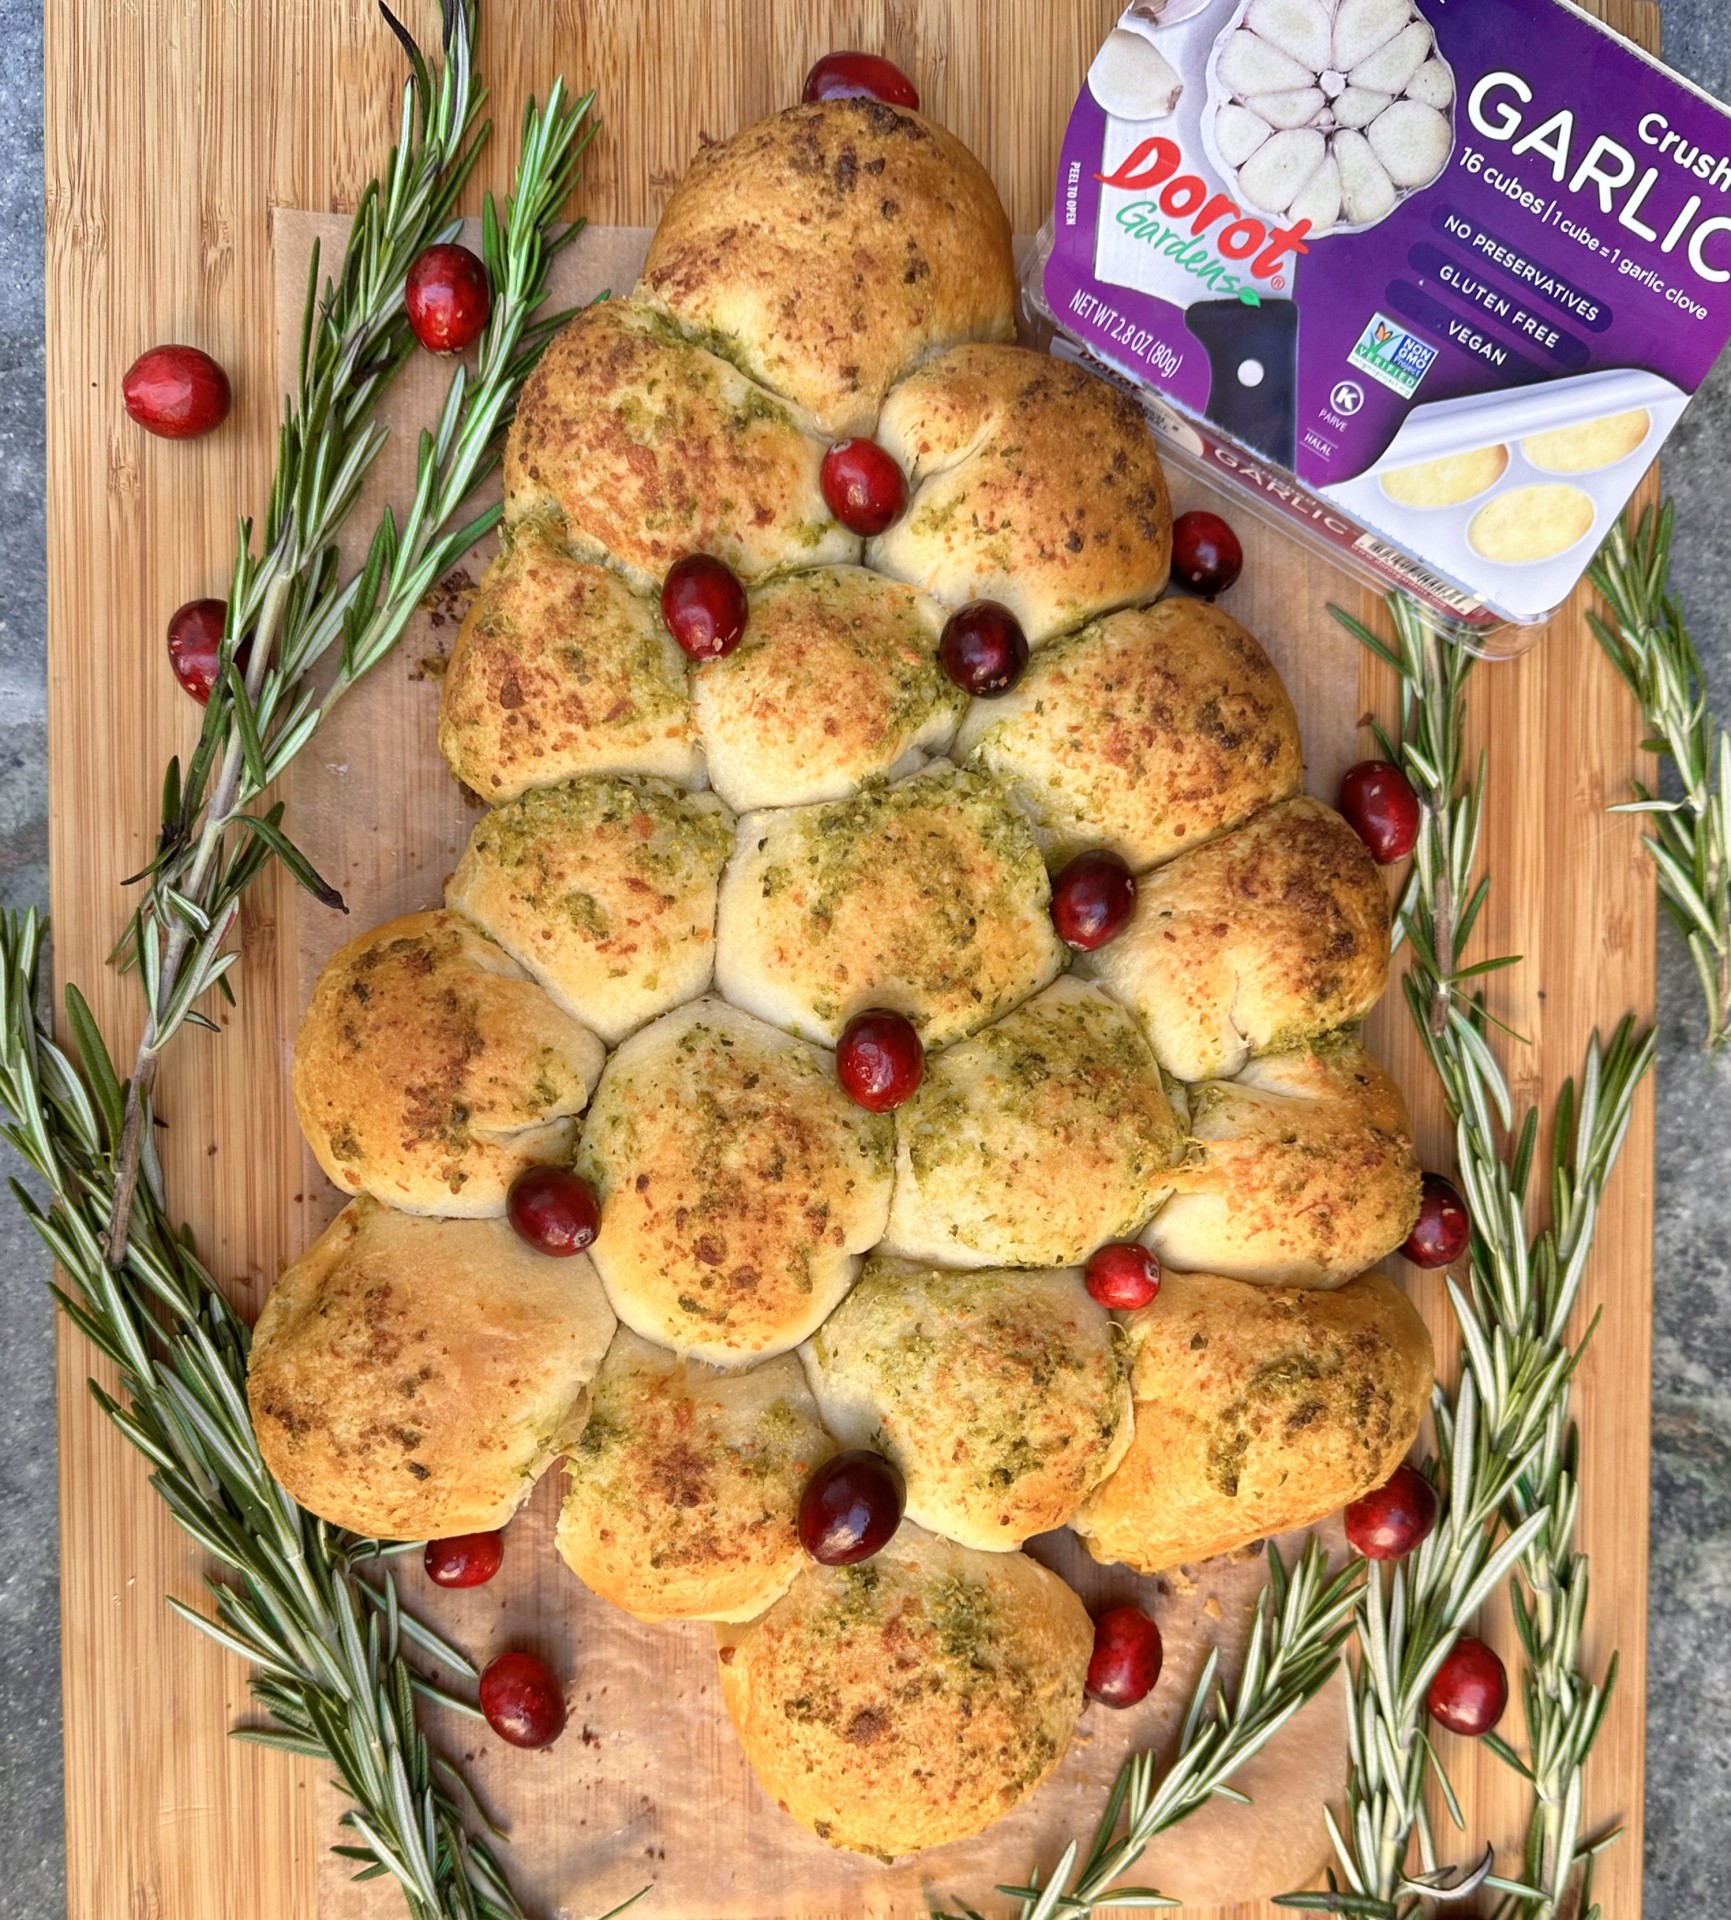 Celebrate the Holidays with Mighty Sesame Co.® and Dorot Gardens® Recipes Created by Celebrity Chef George Duran